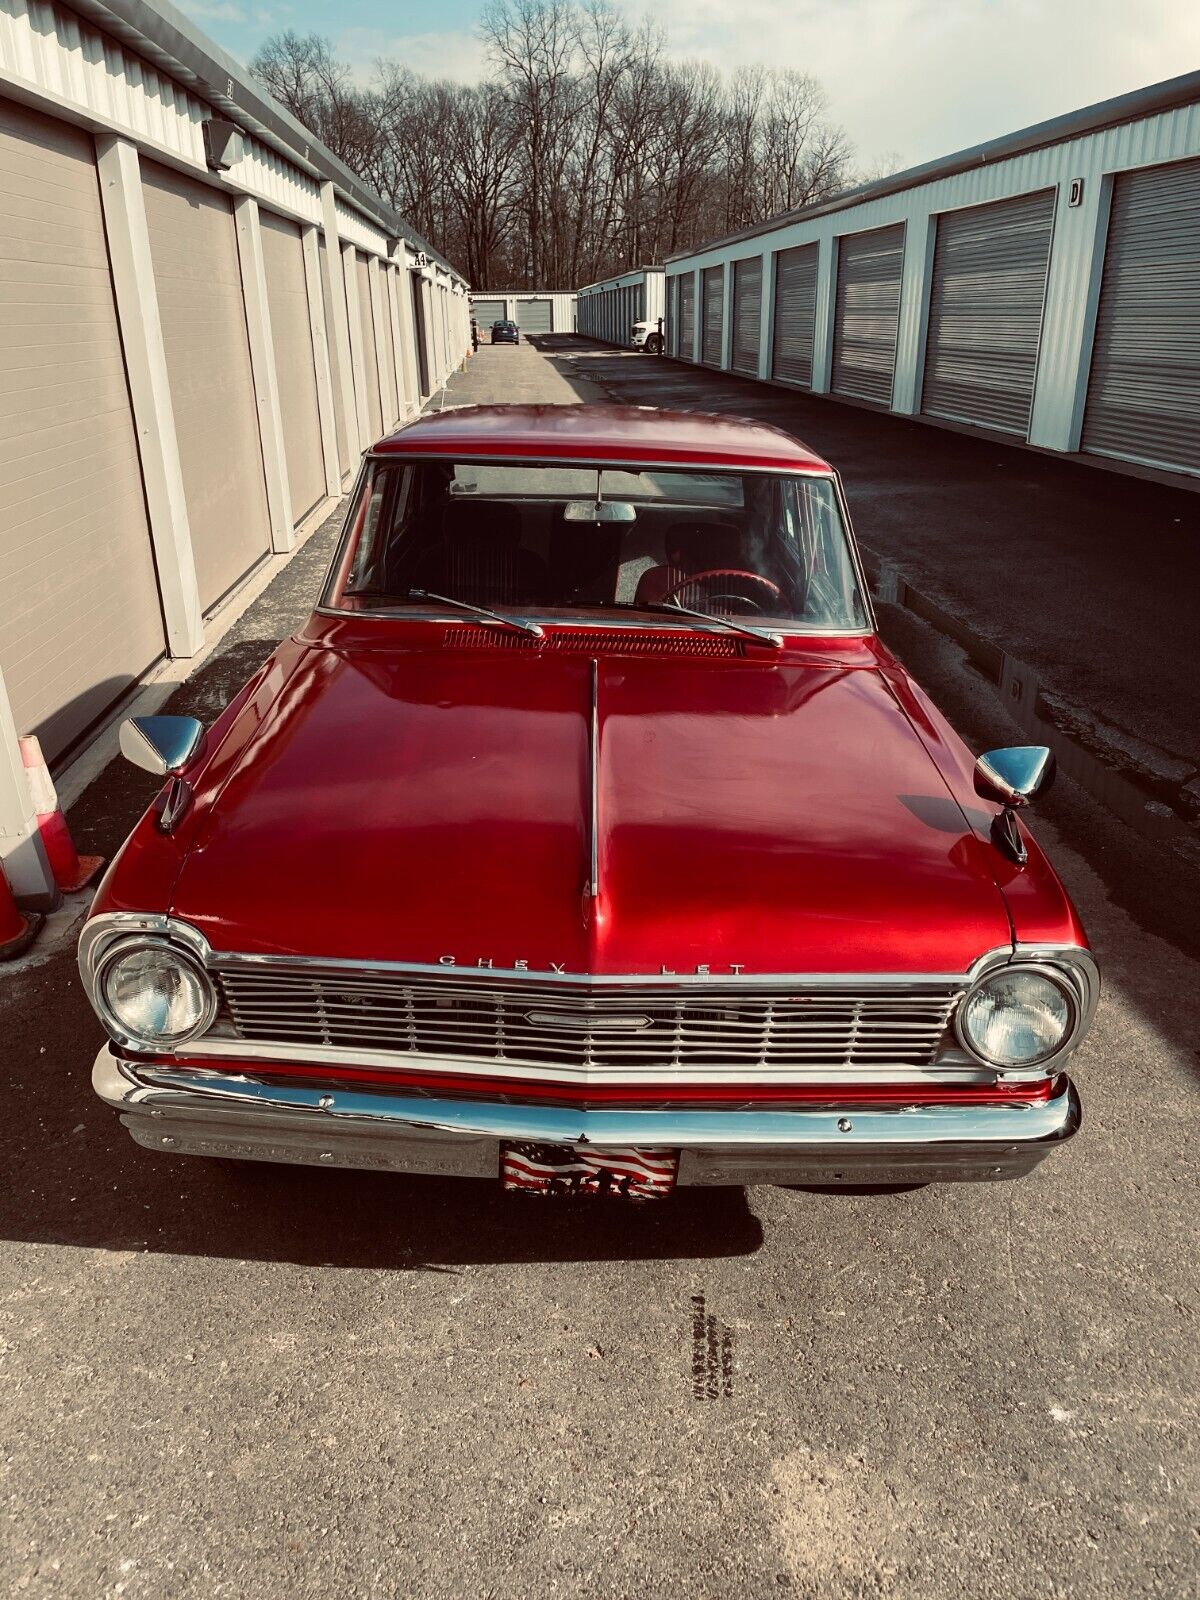 Owner NO RESERVE on this American Classic 1965 Chevy II Nova